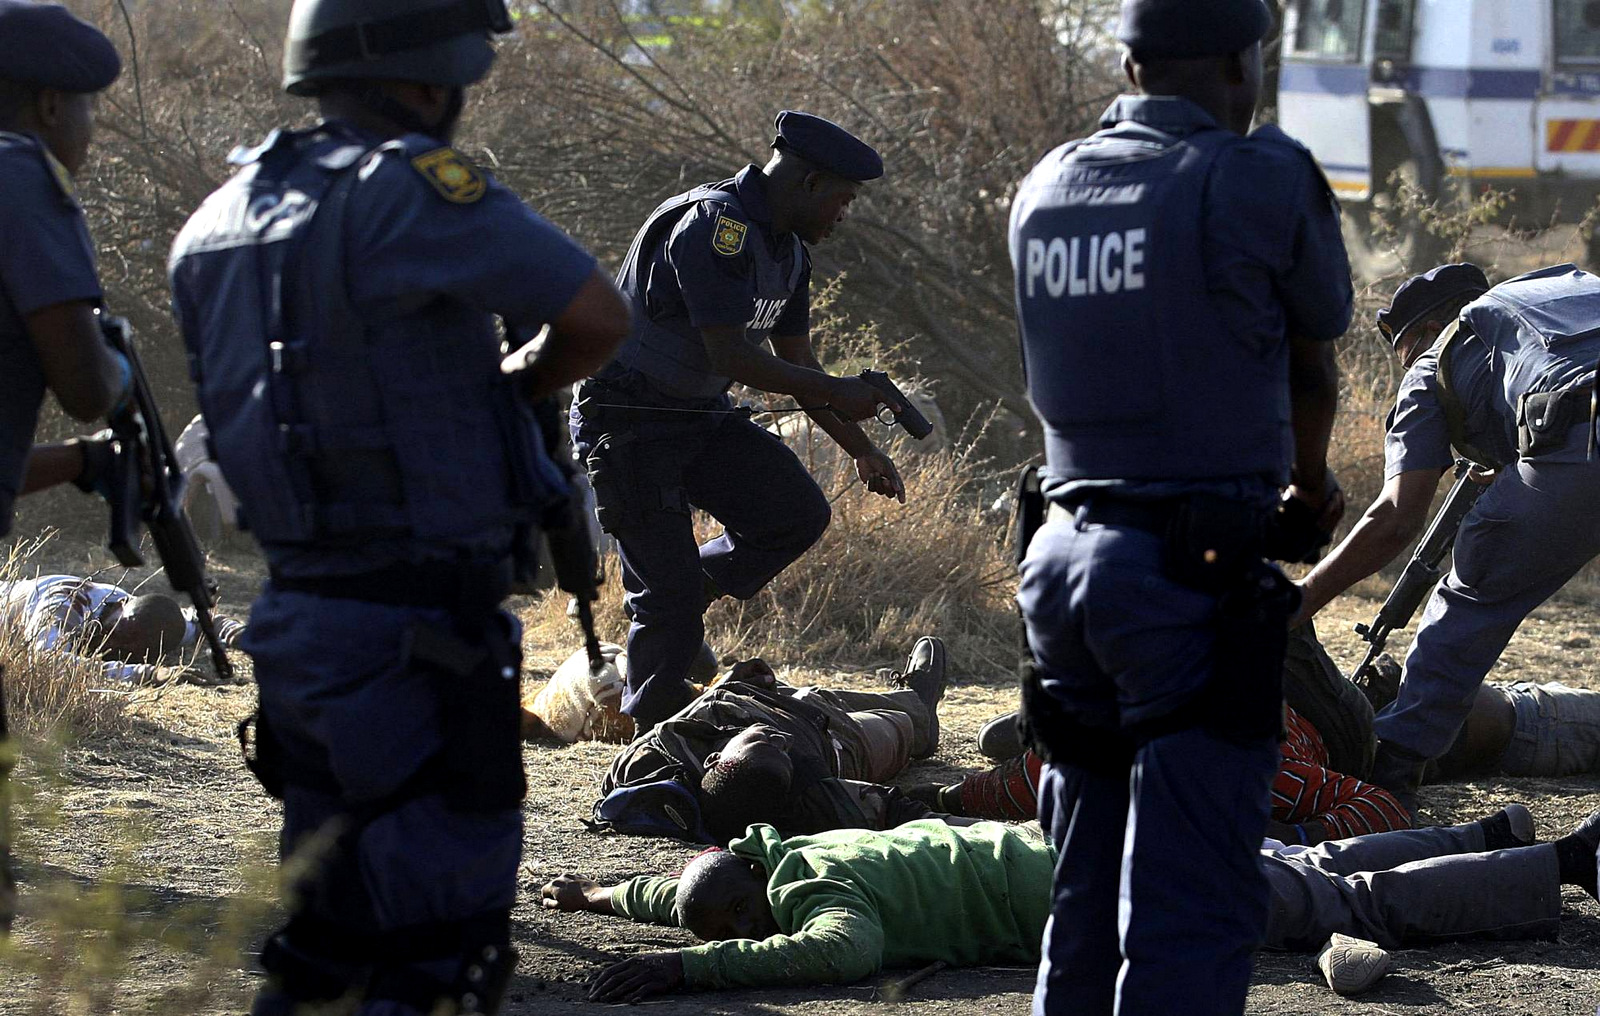 Police surround the bodies of striking miners after opening fire on a crowd at the Lonmin Platinum Mine in Marikana, near Rustenburg, South Africa killing 34. More than five years after the event rights groups say no one has been prosecuted and miners' living conditions are as "squalid" as ever,Aug. 16, 2012. (AP Photo)